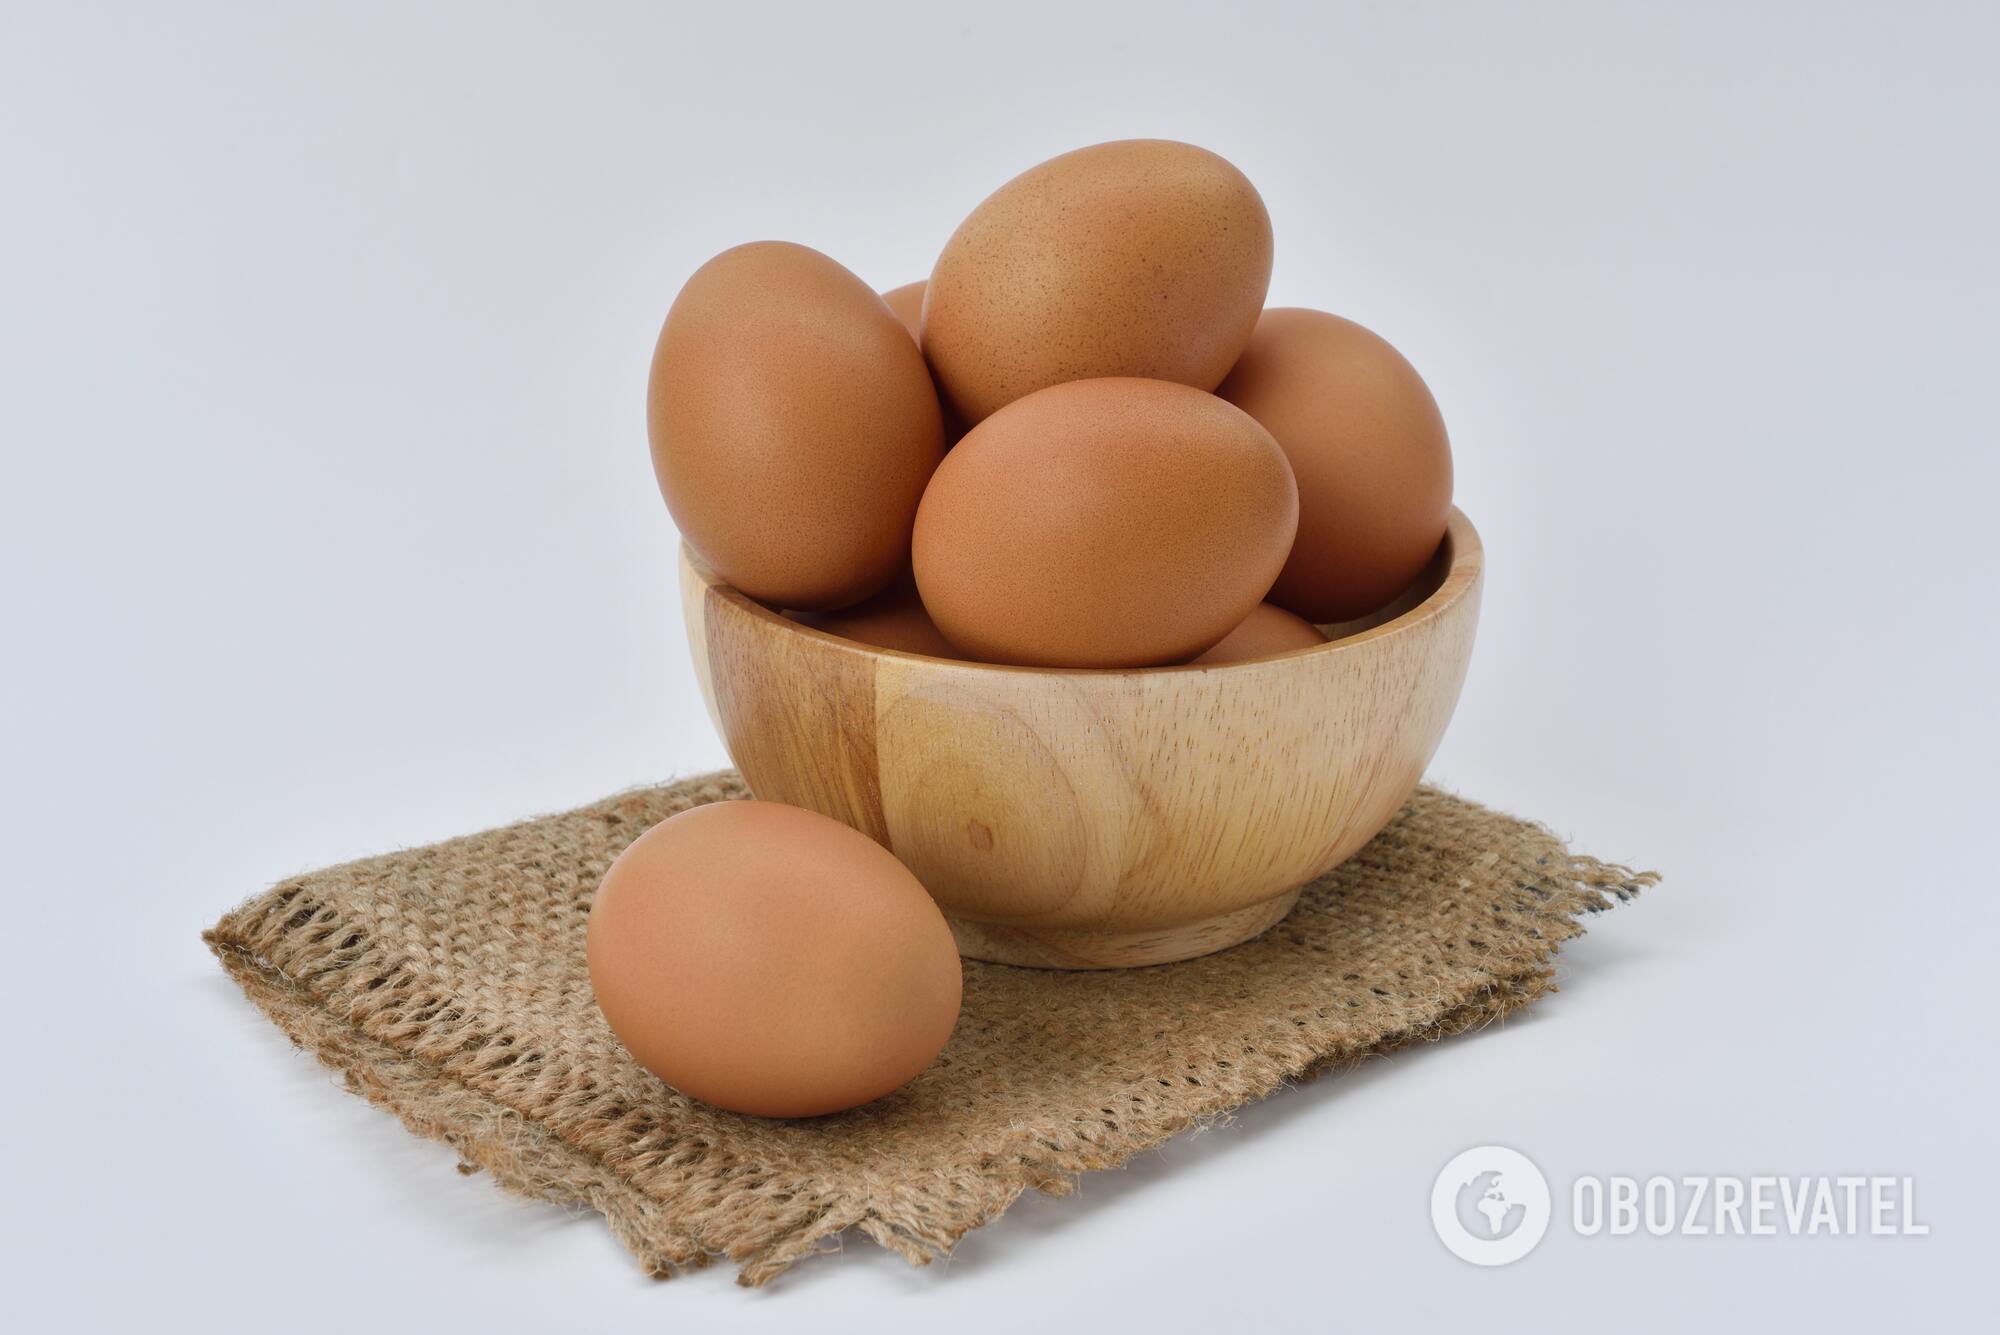 Eggs for cooking